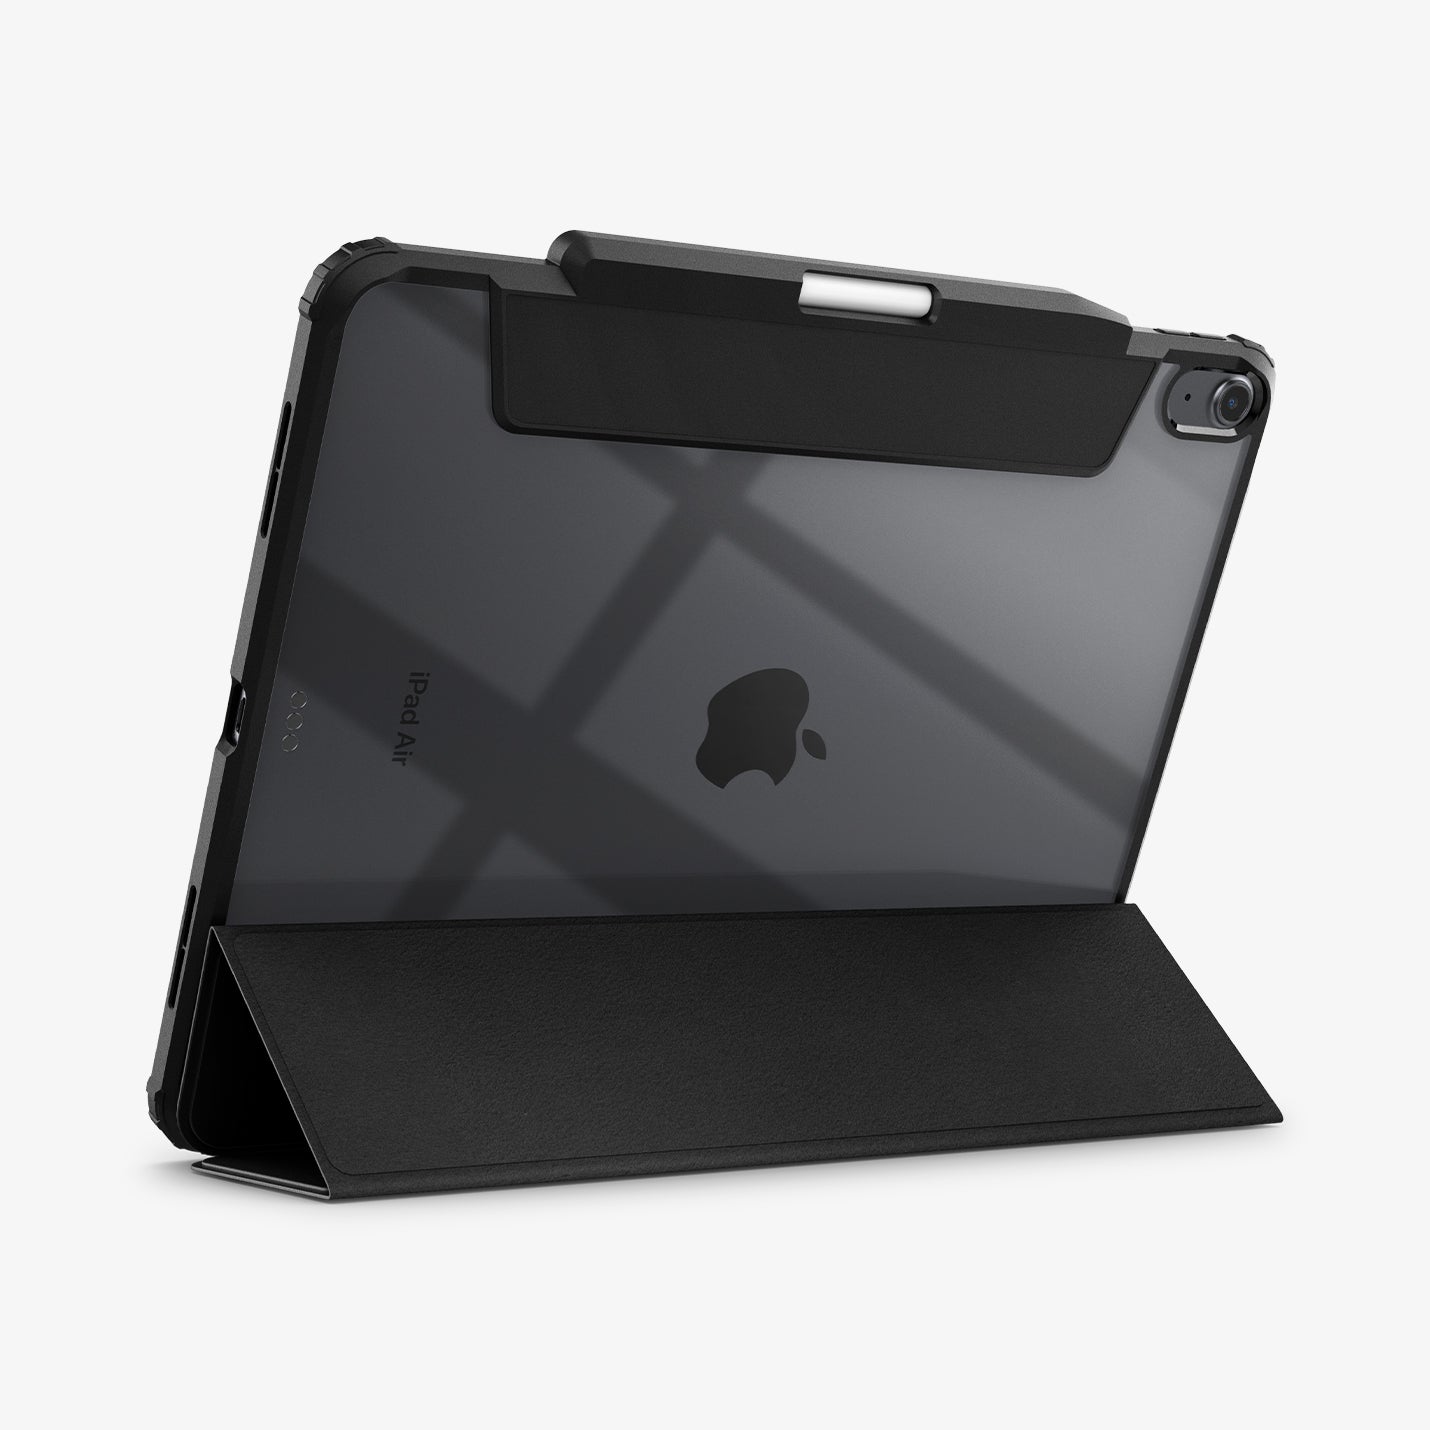 ACS07668 - iPad Air 12.9-inch Case Ultra Hybrid Pro in Black showing the back with device propped up by built in kickstand with s pen attached